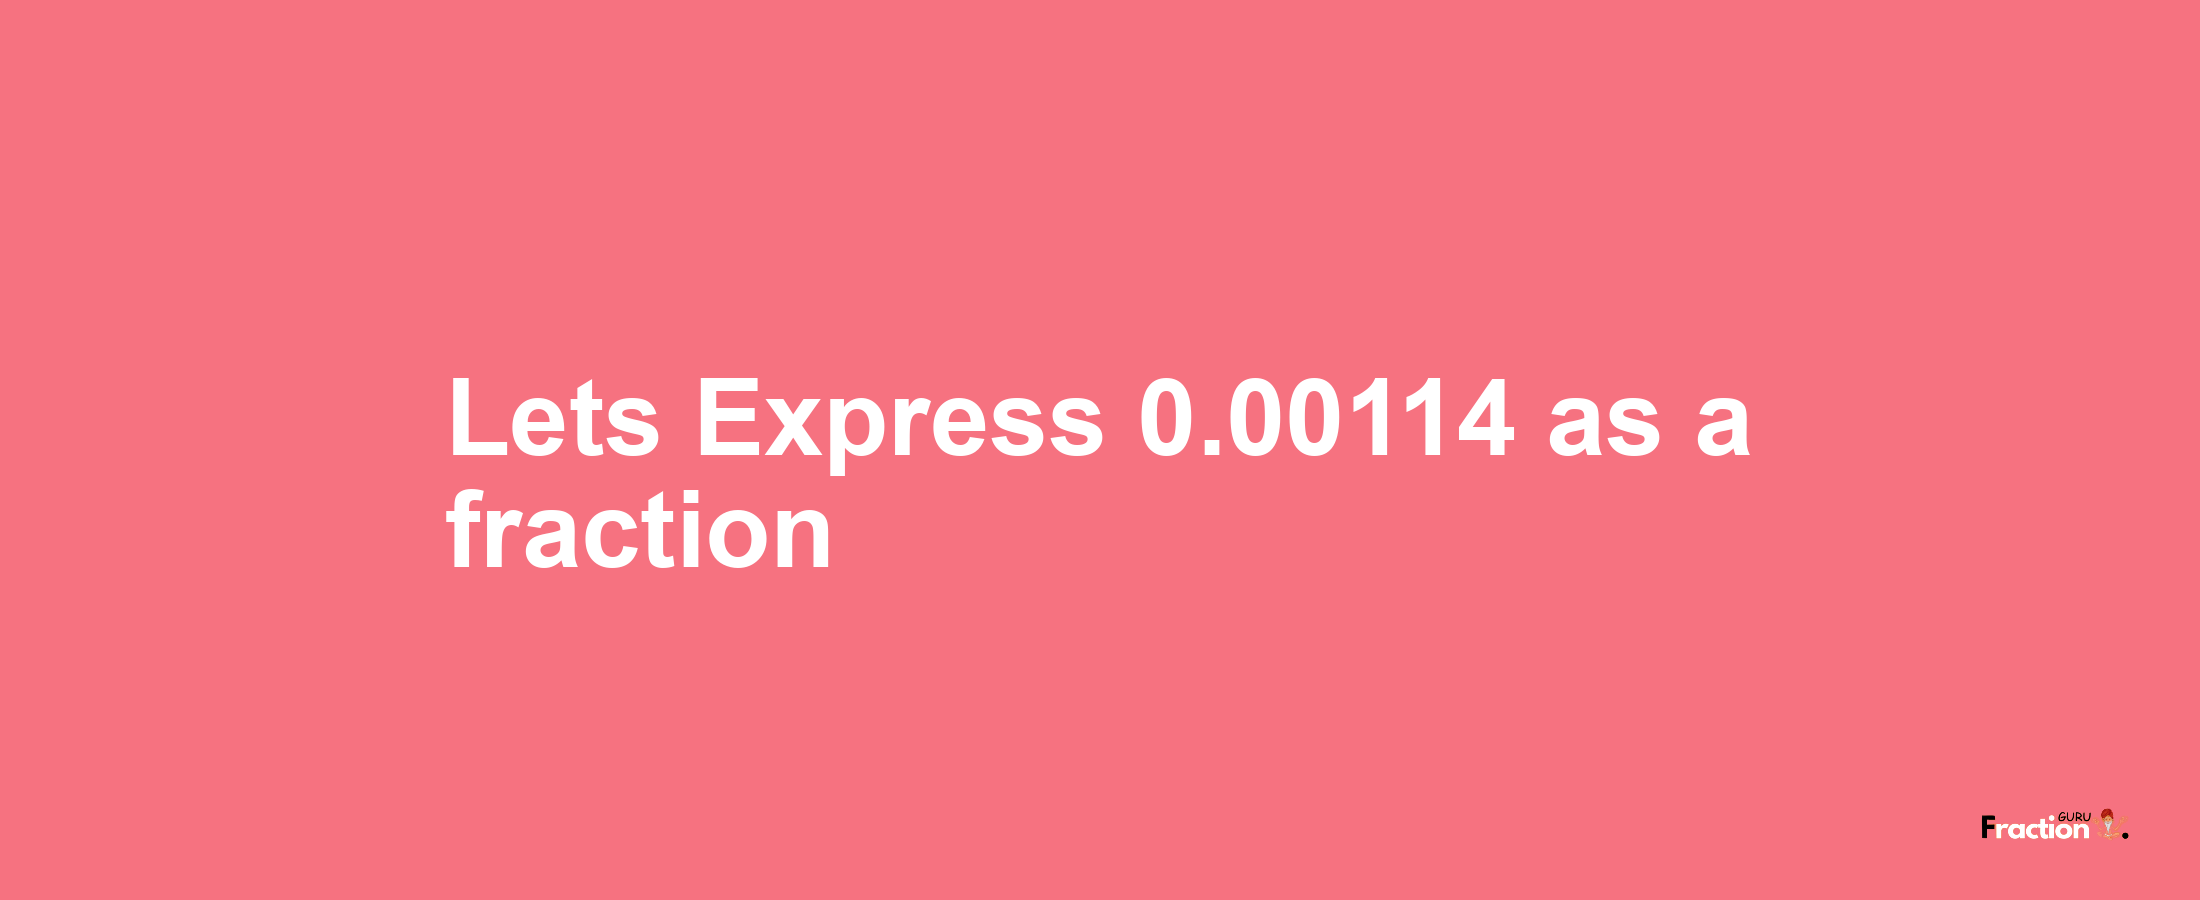 Lets Express 0.00114 as afraction